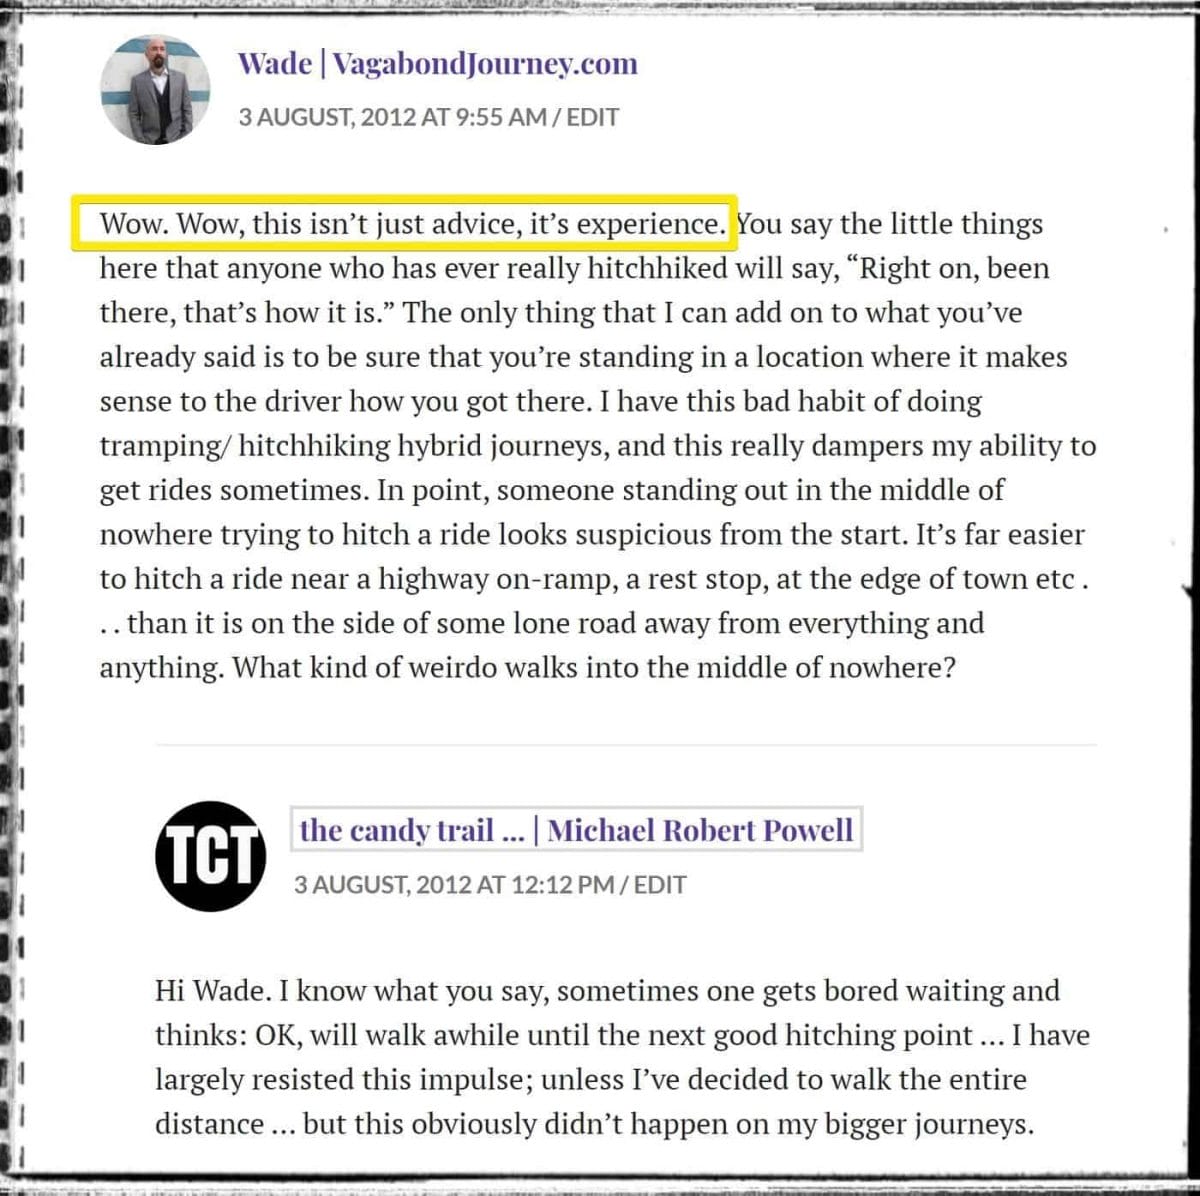 How-to-hitchhike-ANYWHERE-THE-CANDY-TRAIL-blog-comments